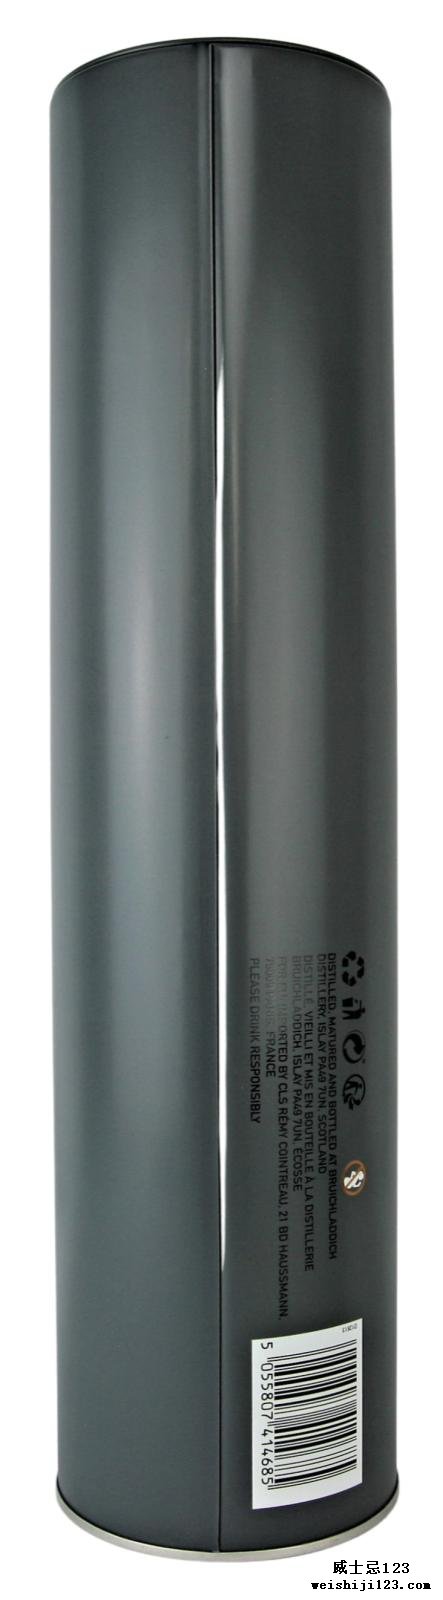 Octomore Edition 12.1 The Impossible Equation / 130.8 PPM